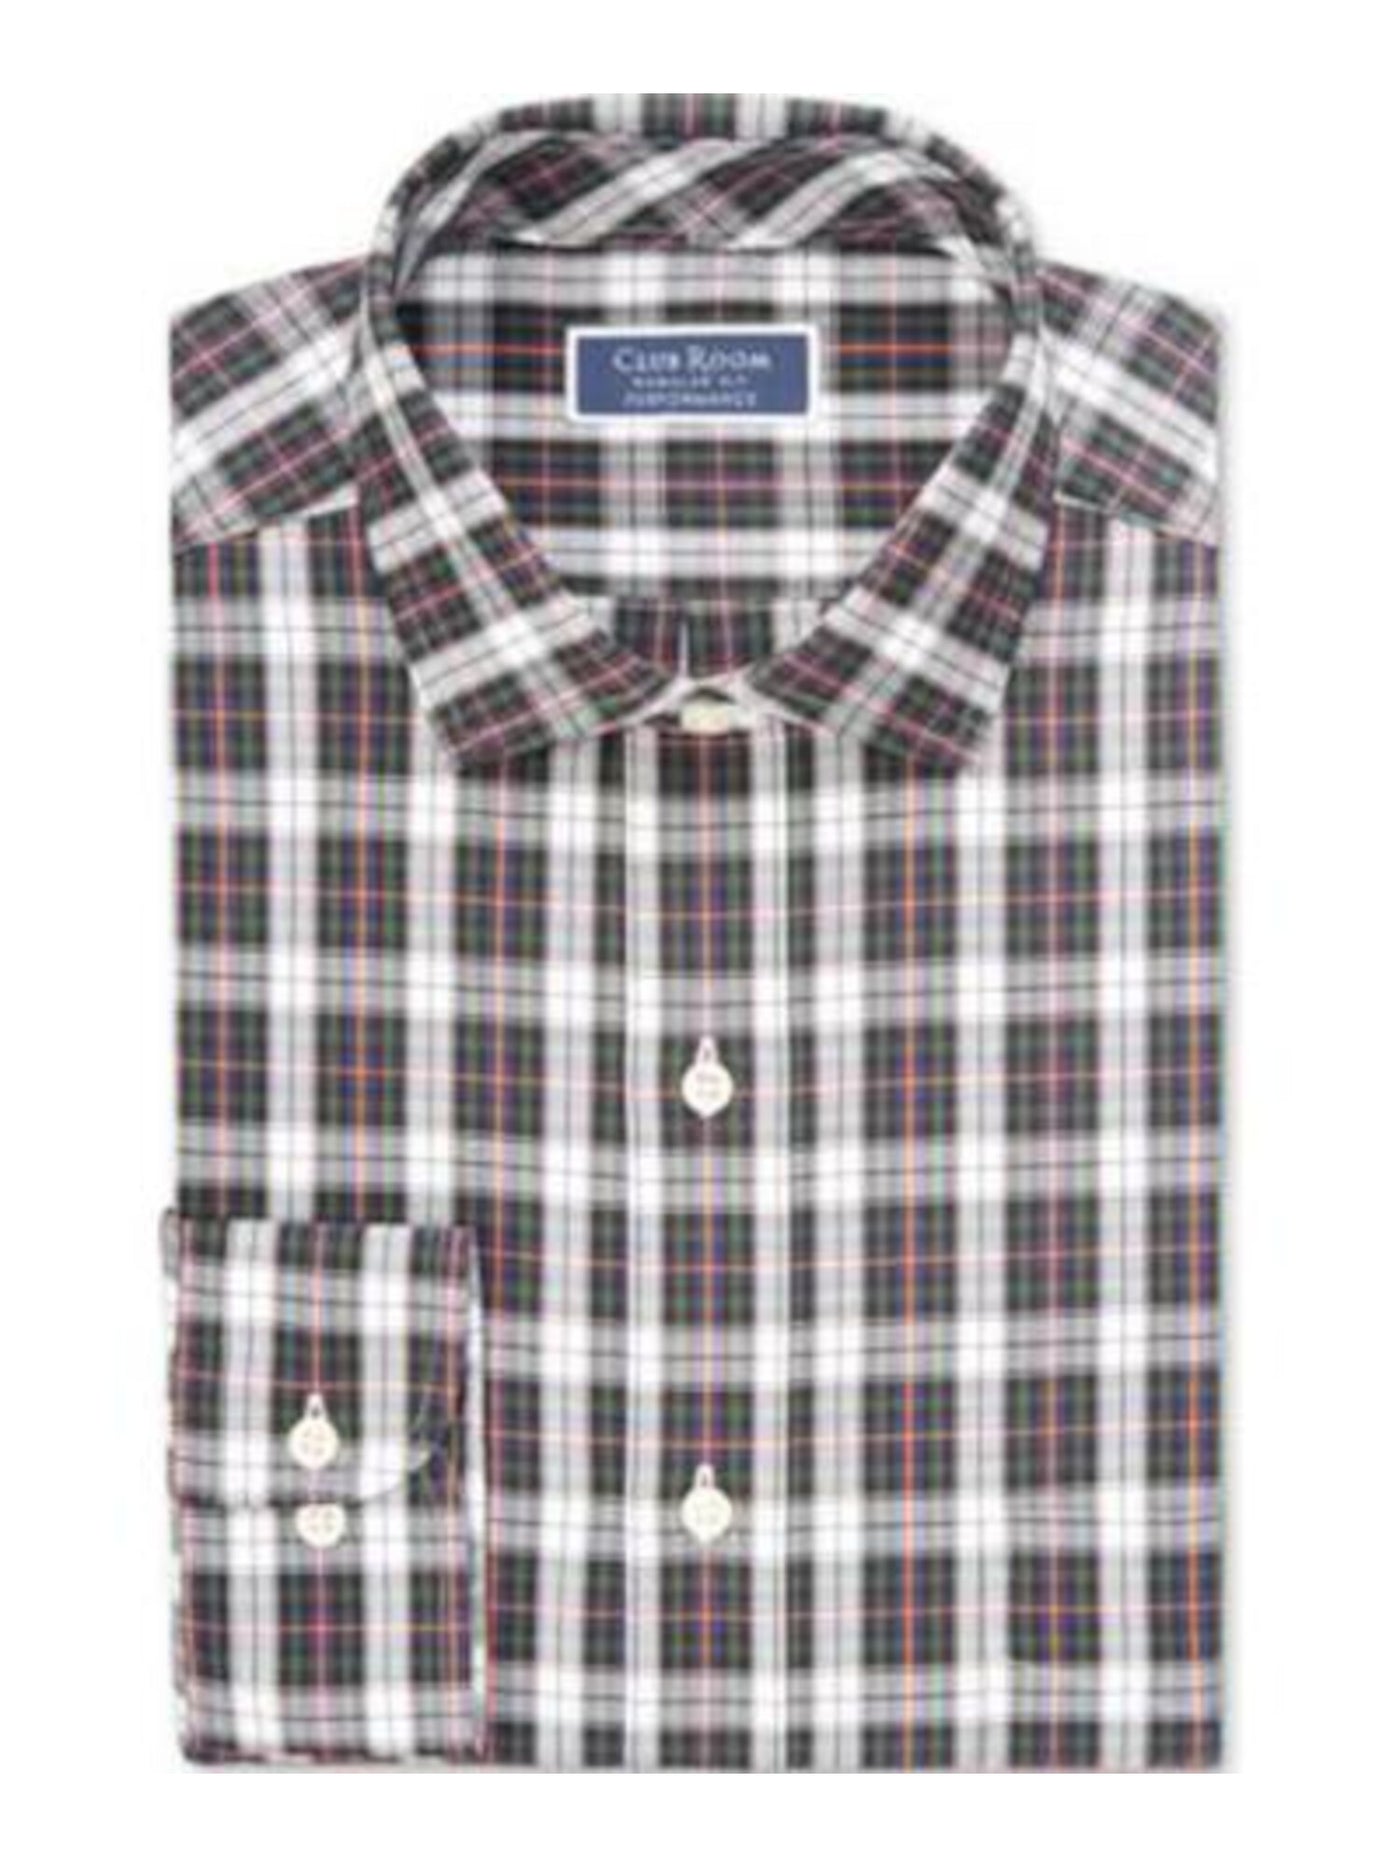 CLUBROOM Mens White Easy Care, Tartan Plaid Collared Classic Fit Cotton Dress Shirt 17- 32/33